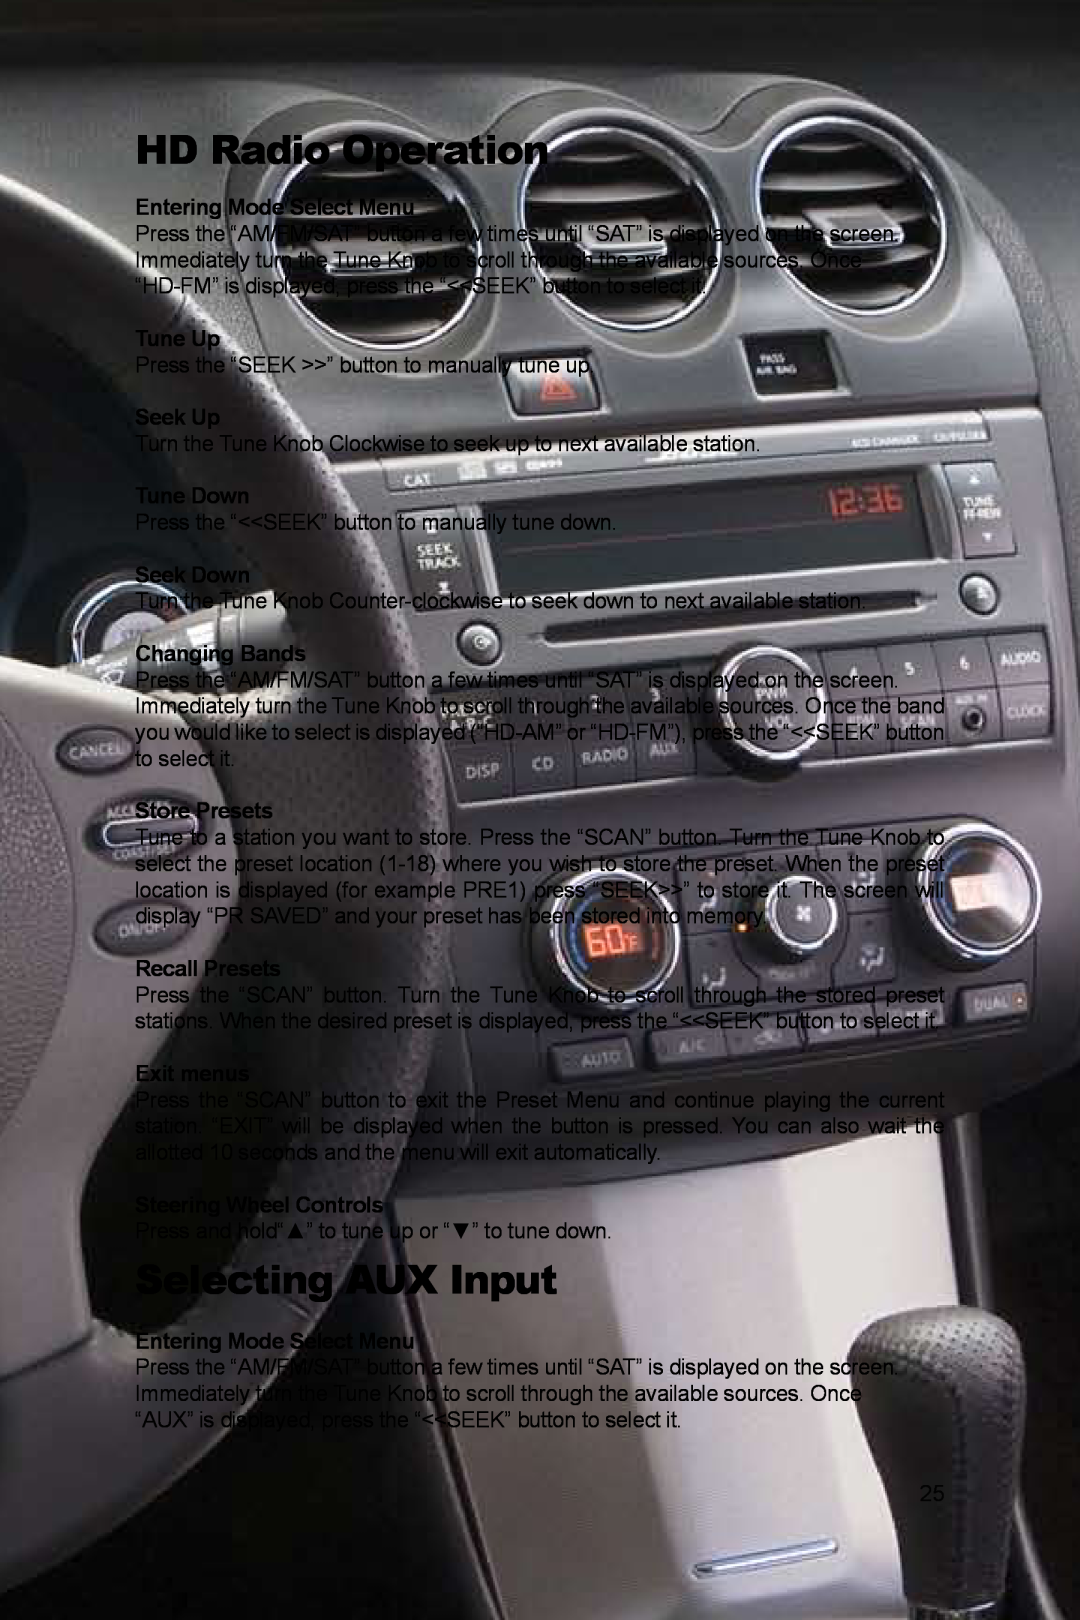 Peripheral Electronics PGHNI2 HD Radio Operation, Selecting AUX Input, Entering Mode Select Menu, Tune Up, Seek Up 